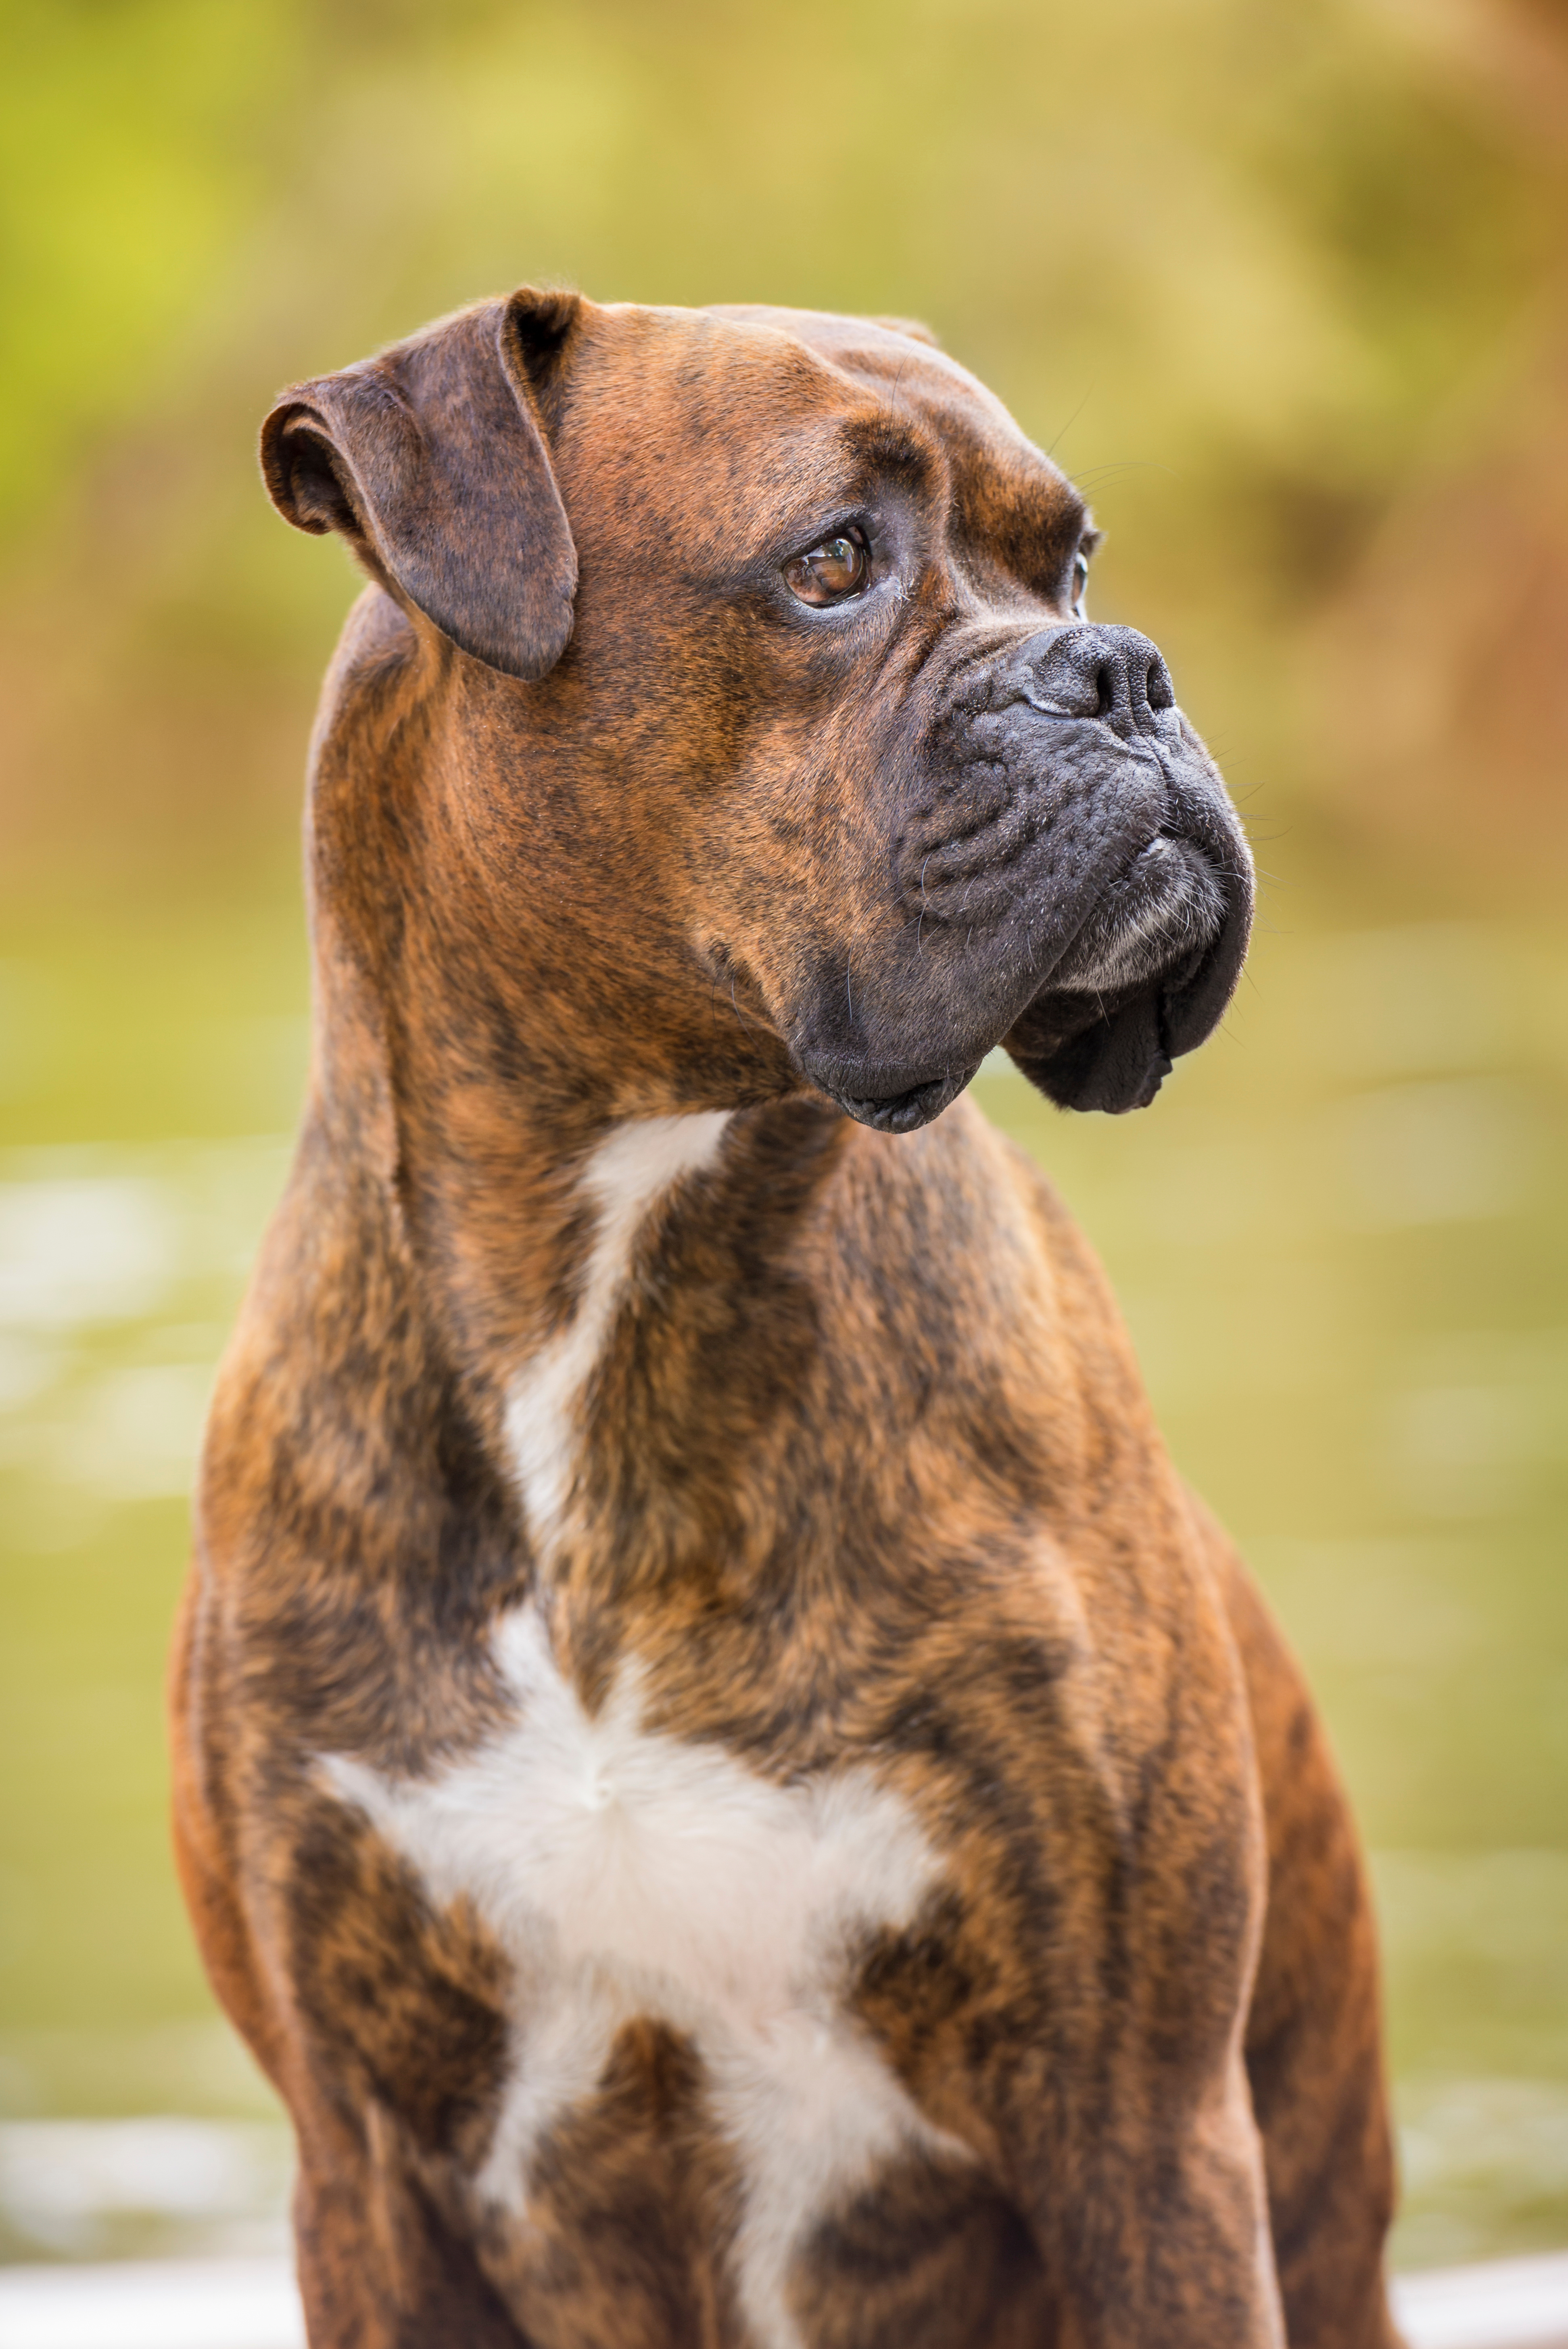 A trained boxer dog - Dog Training Elite Central Massachusetts is the best choice for boxer dog training in Lowell, MA!